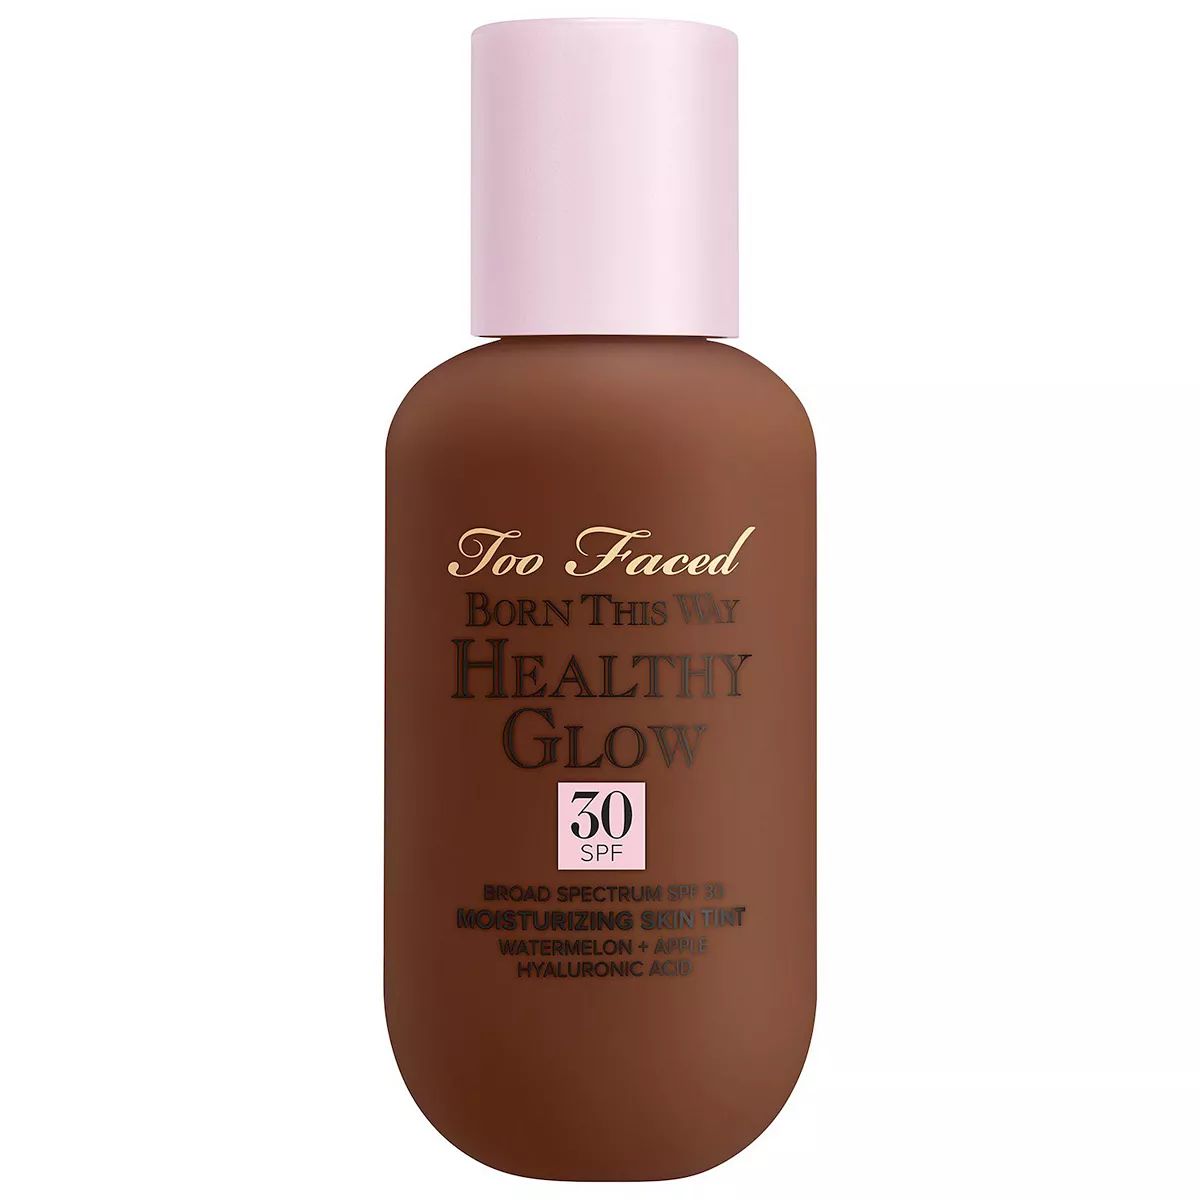 Too Faced Born This Way Healthy Glow SPF 30 Skin Tint Foundation | Kohl's